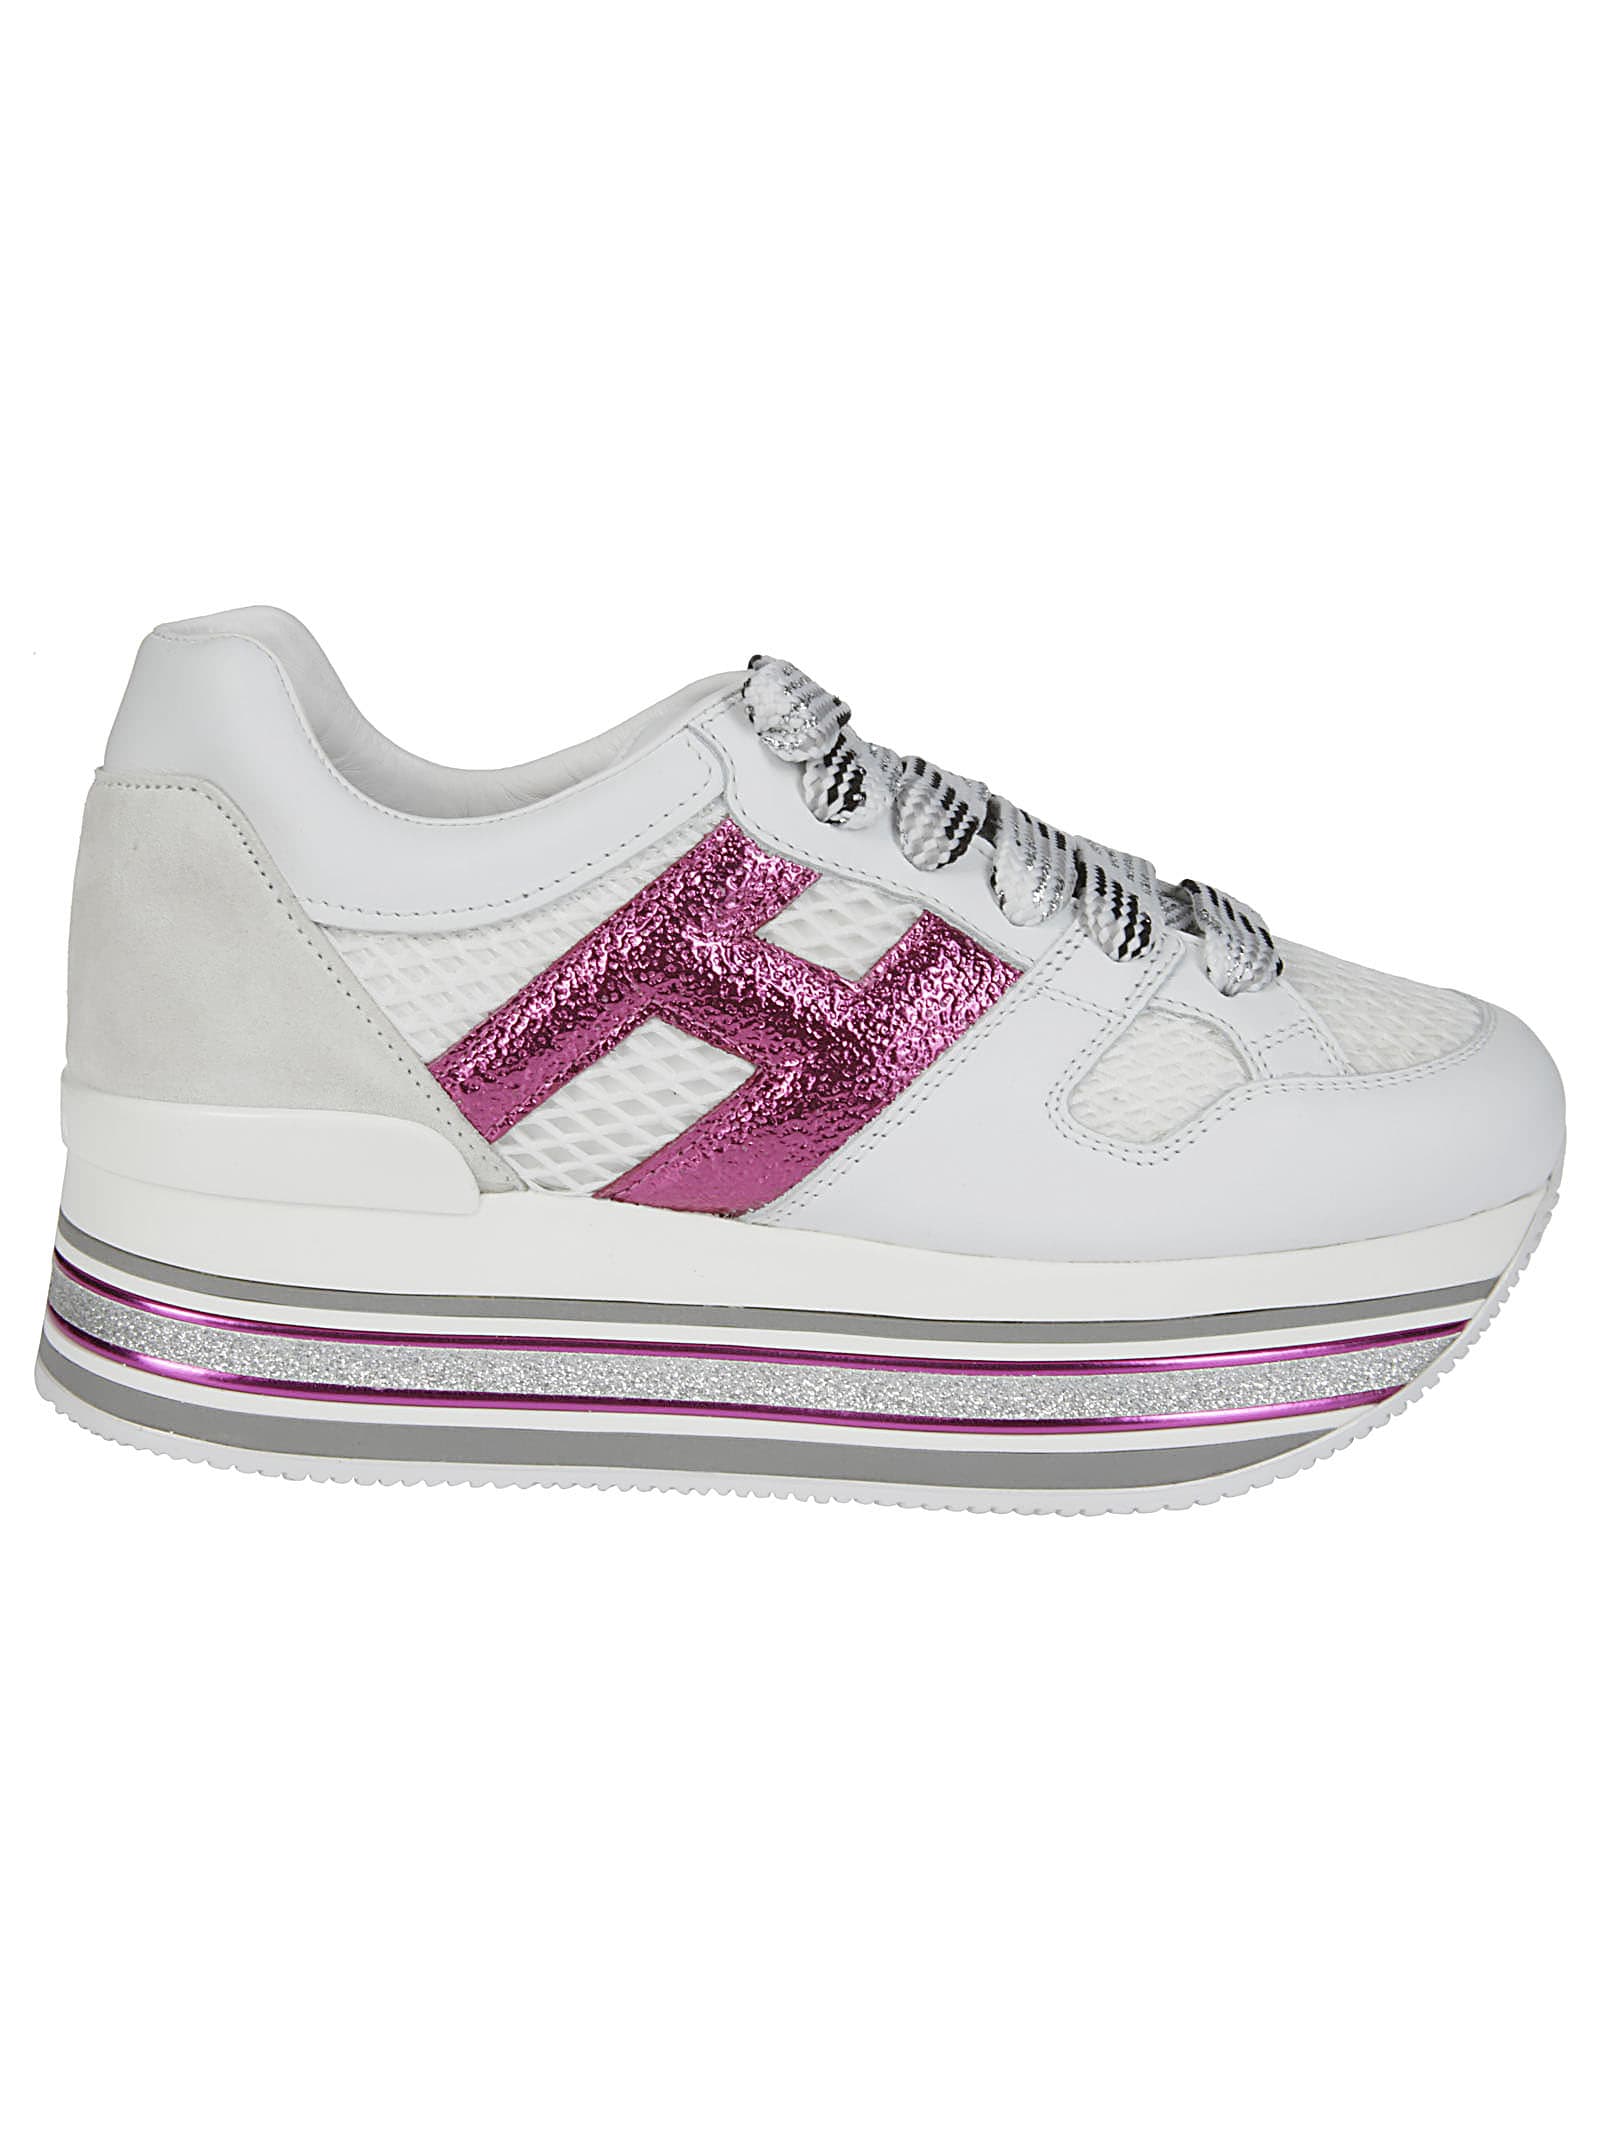 HOGAN WHITE LEATHER H516 trainers,11238576